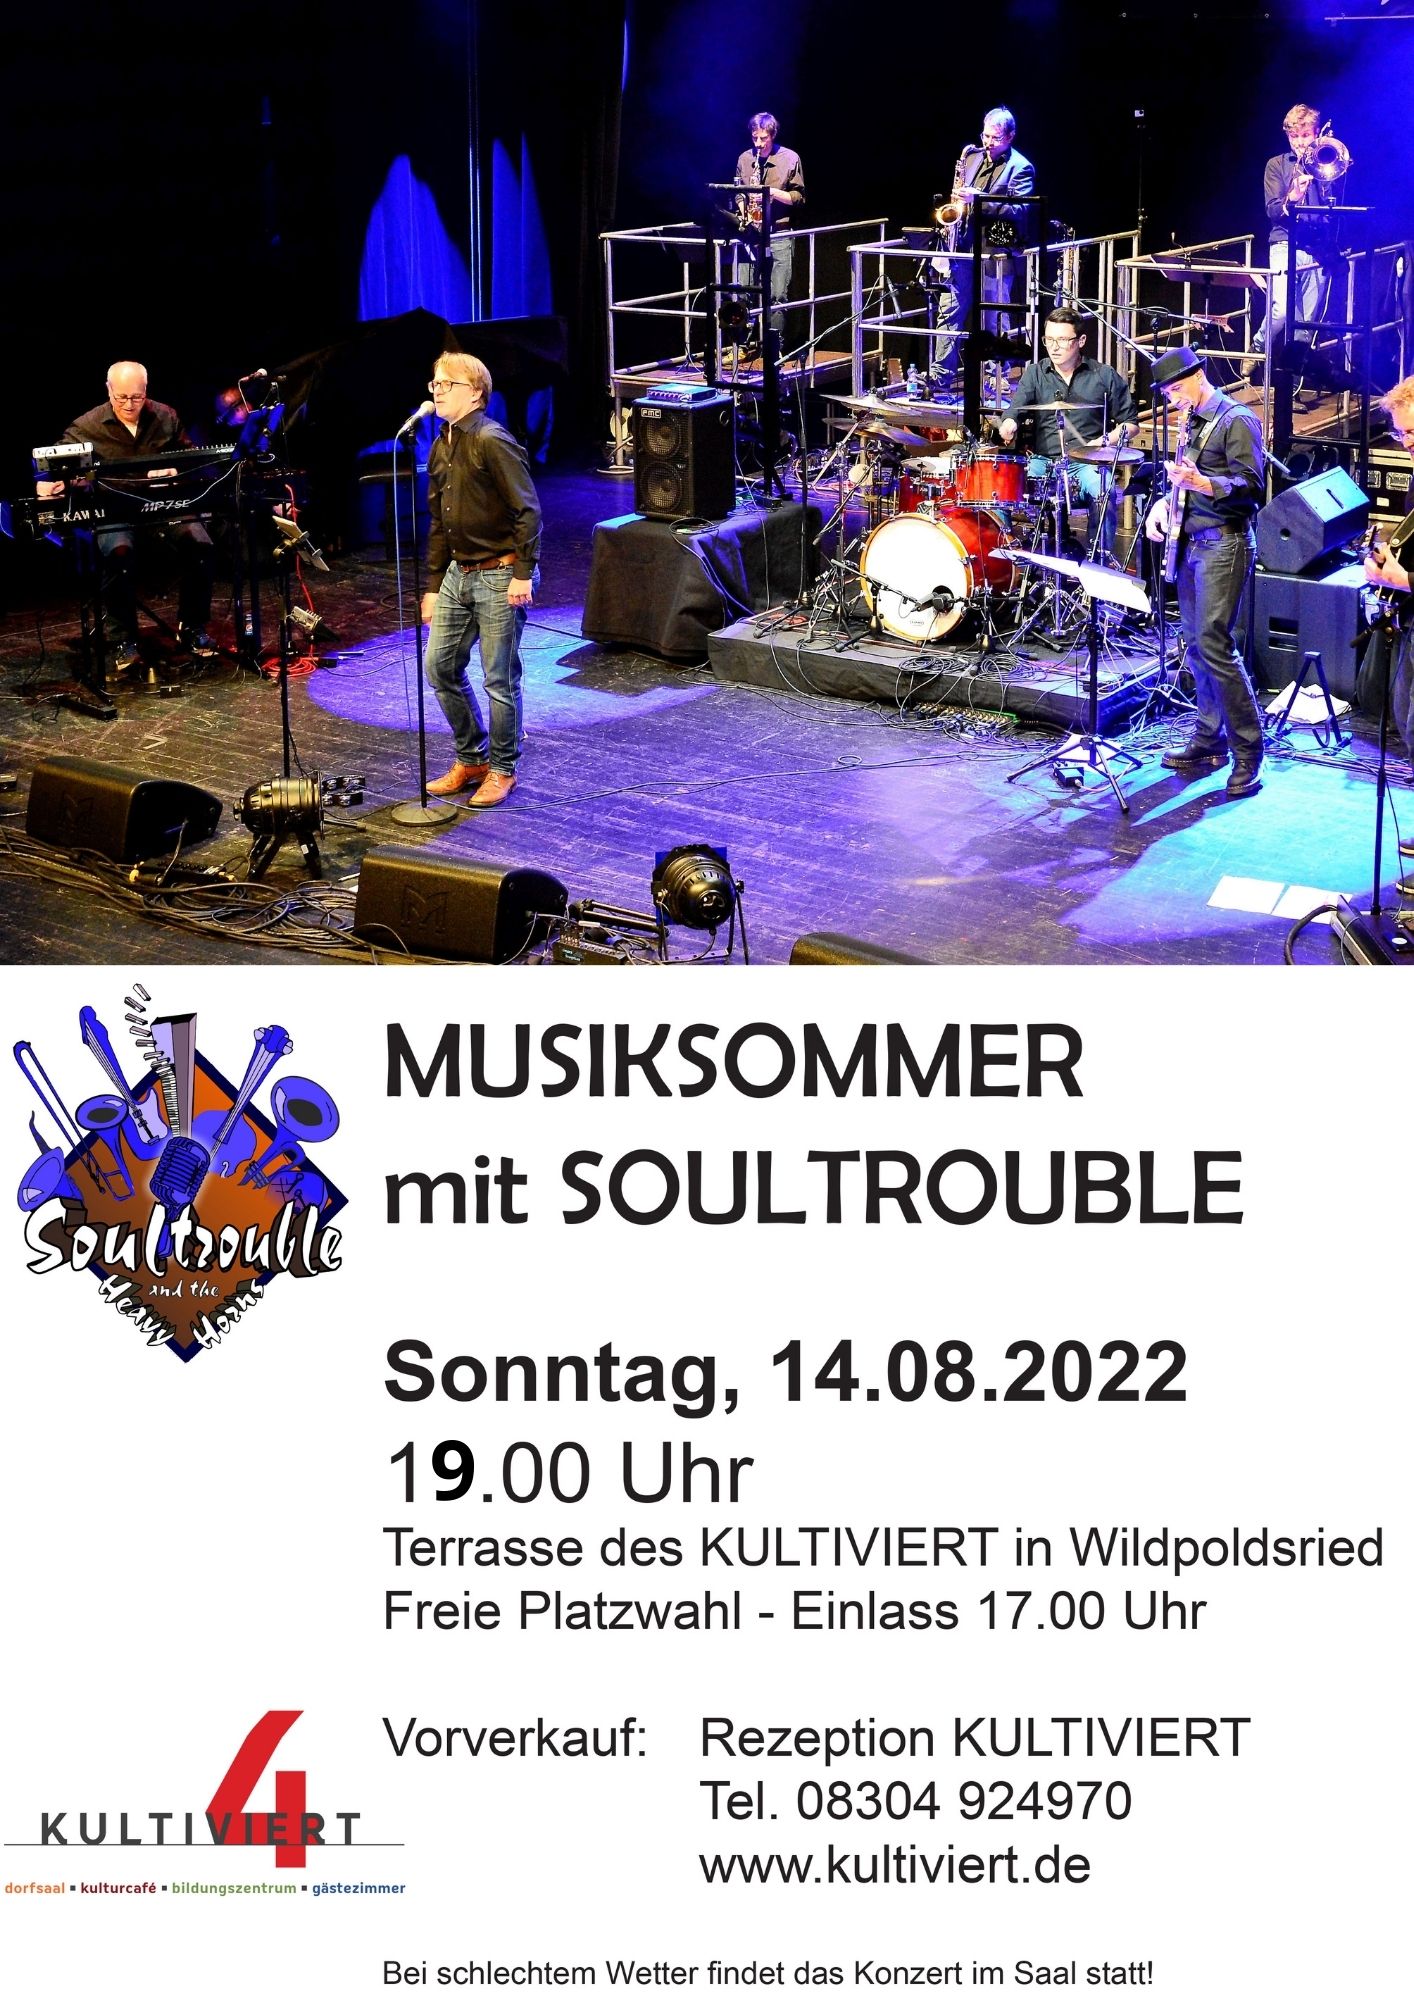 Read more about the article MUSIKSOMMER mit SOULTROUBLE